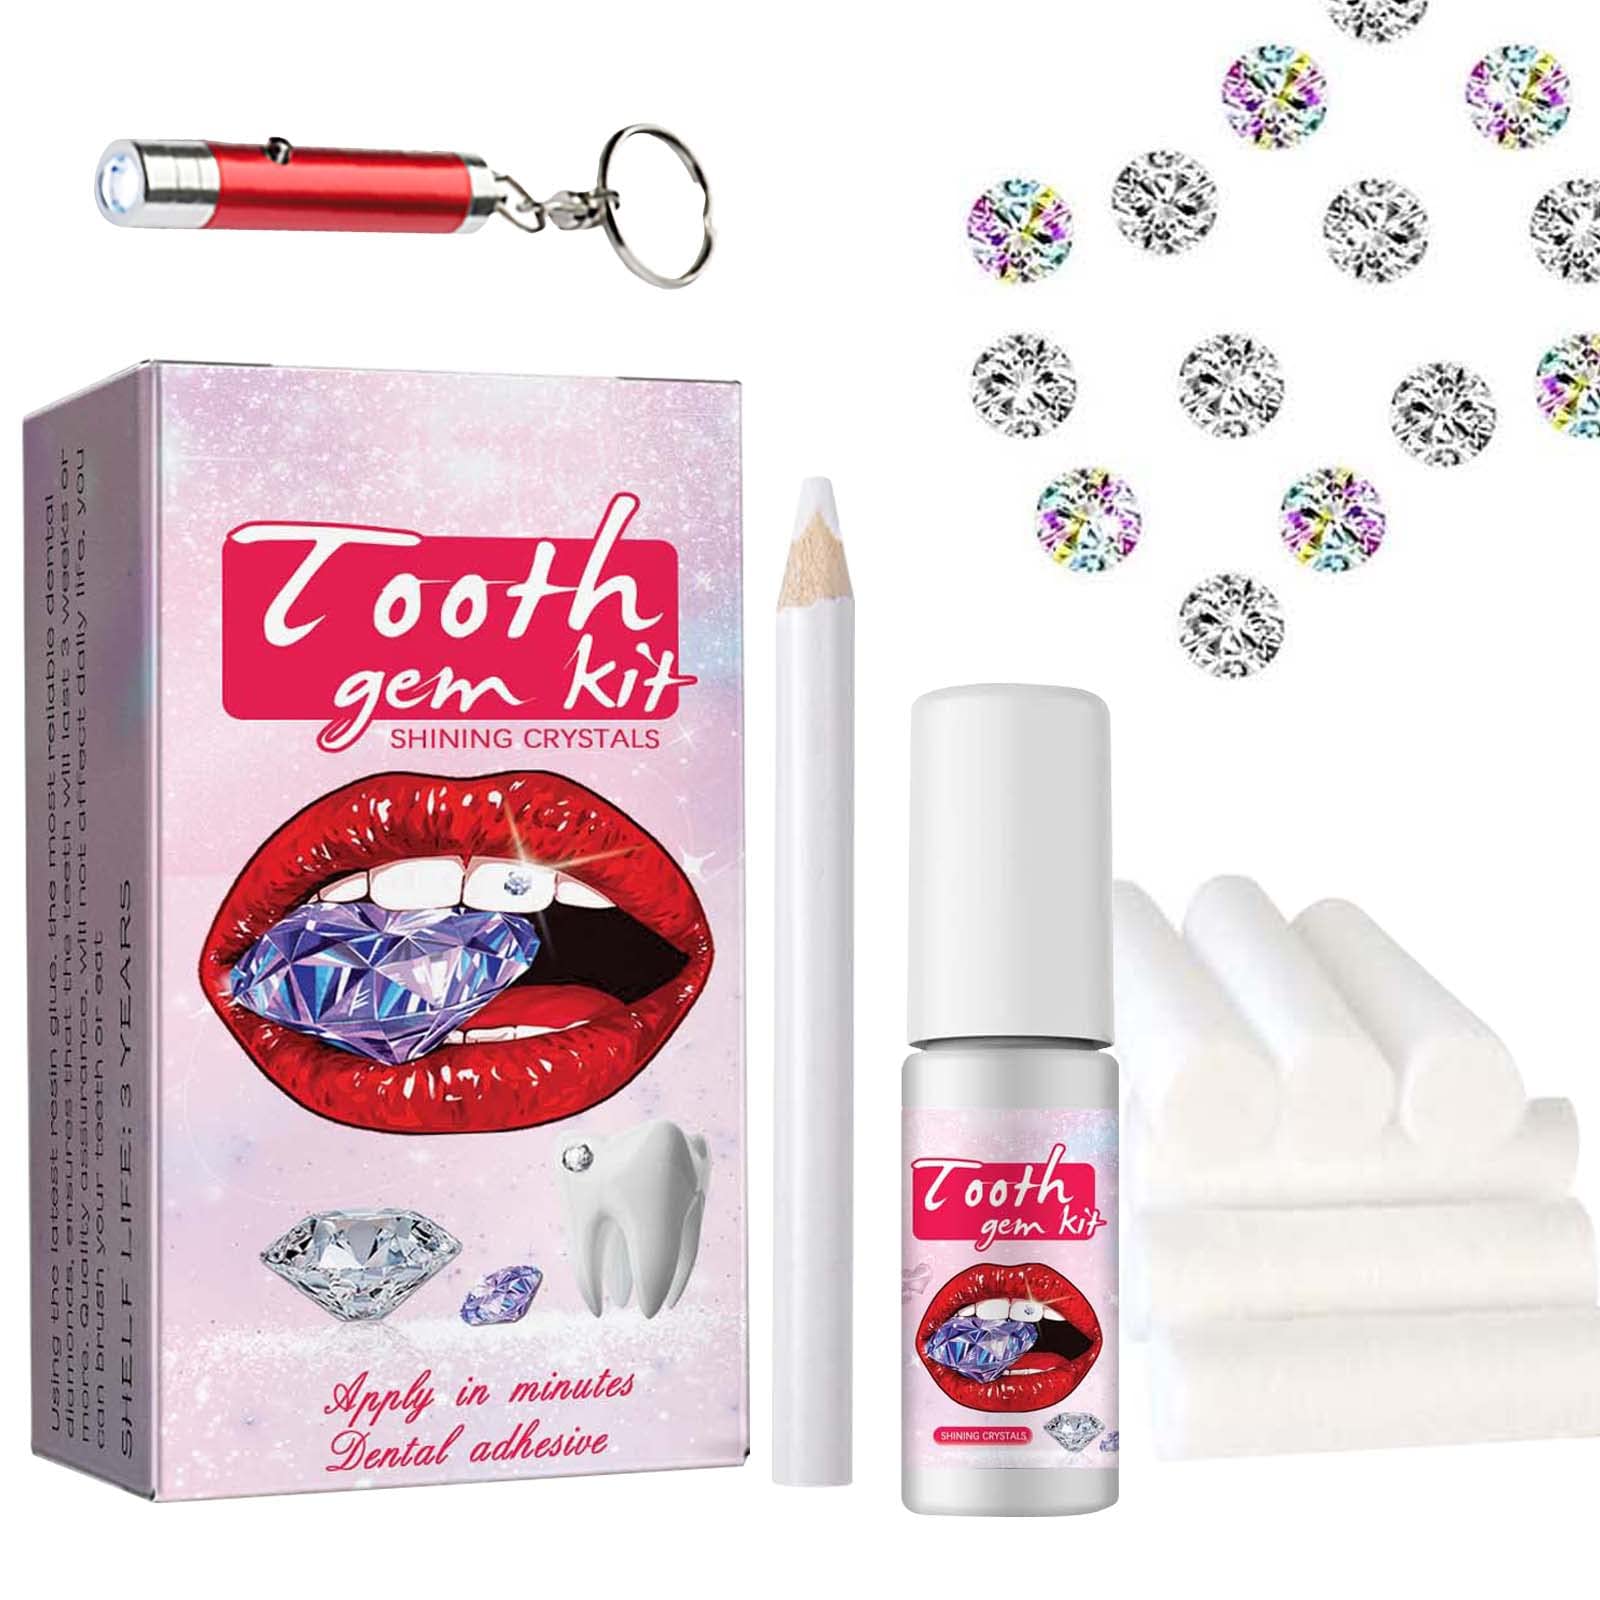 Tooth Gems Kit For Teeth With Teeth Gems And Tooth Gem Glue,Dental Curing  Light,Crystal Gems,These Are DIY Tooth Gems Crystals Starter Essential Teeth  Jewelry Kits